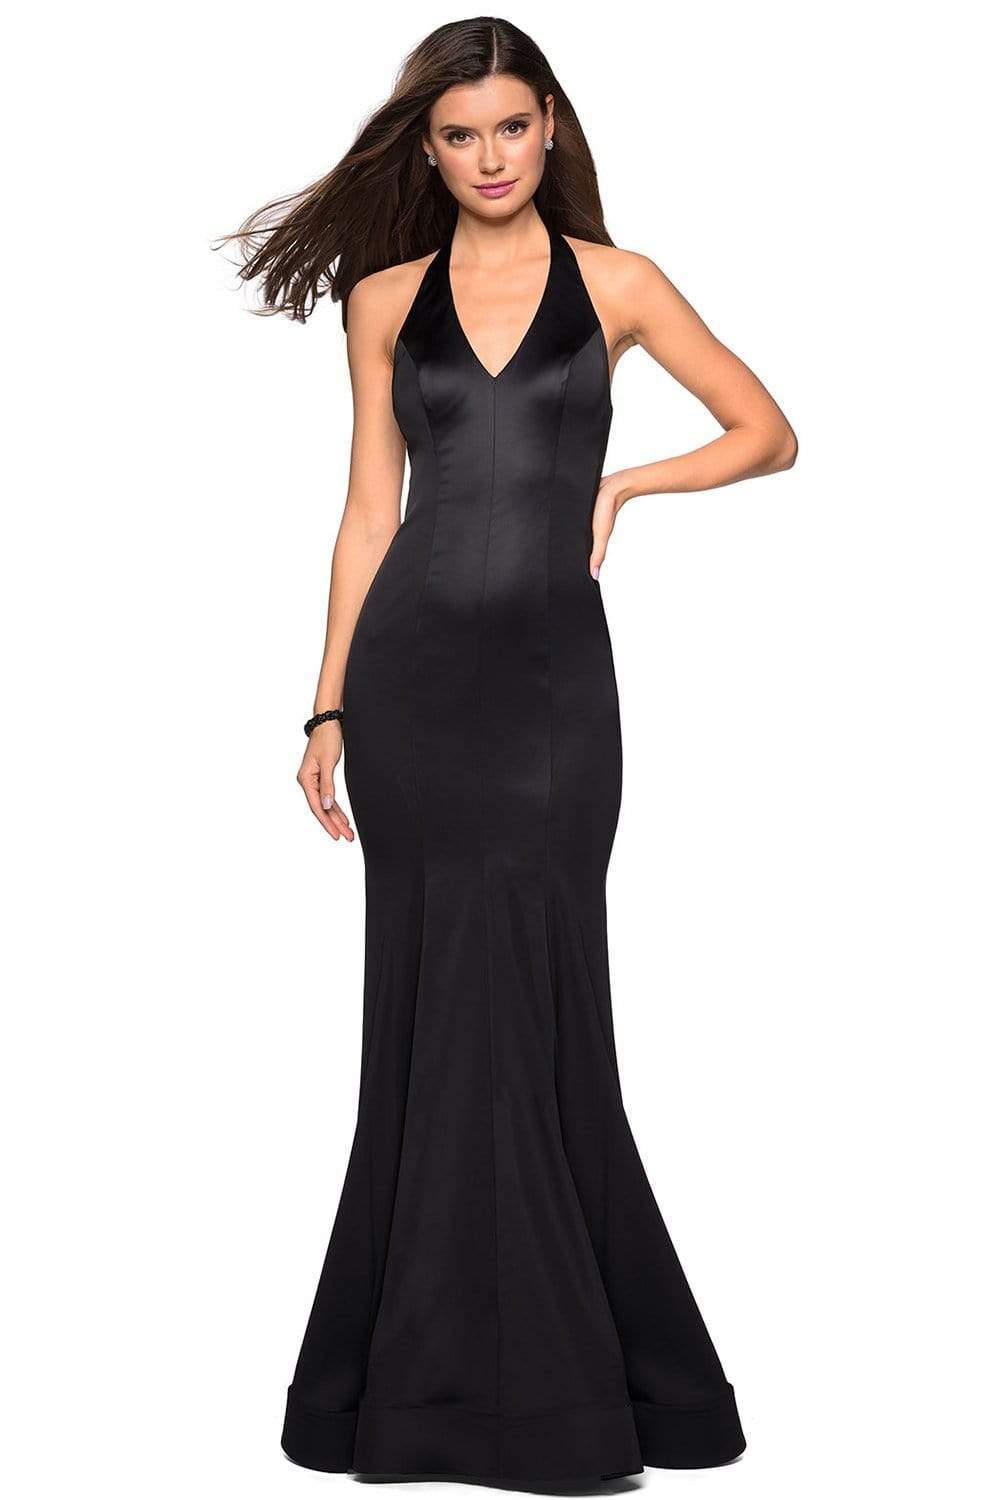 La Femme - 27653 Plunging Halter Fitted Trumpet Evening Gown
